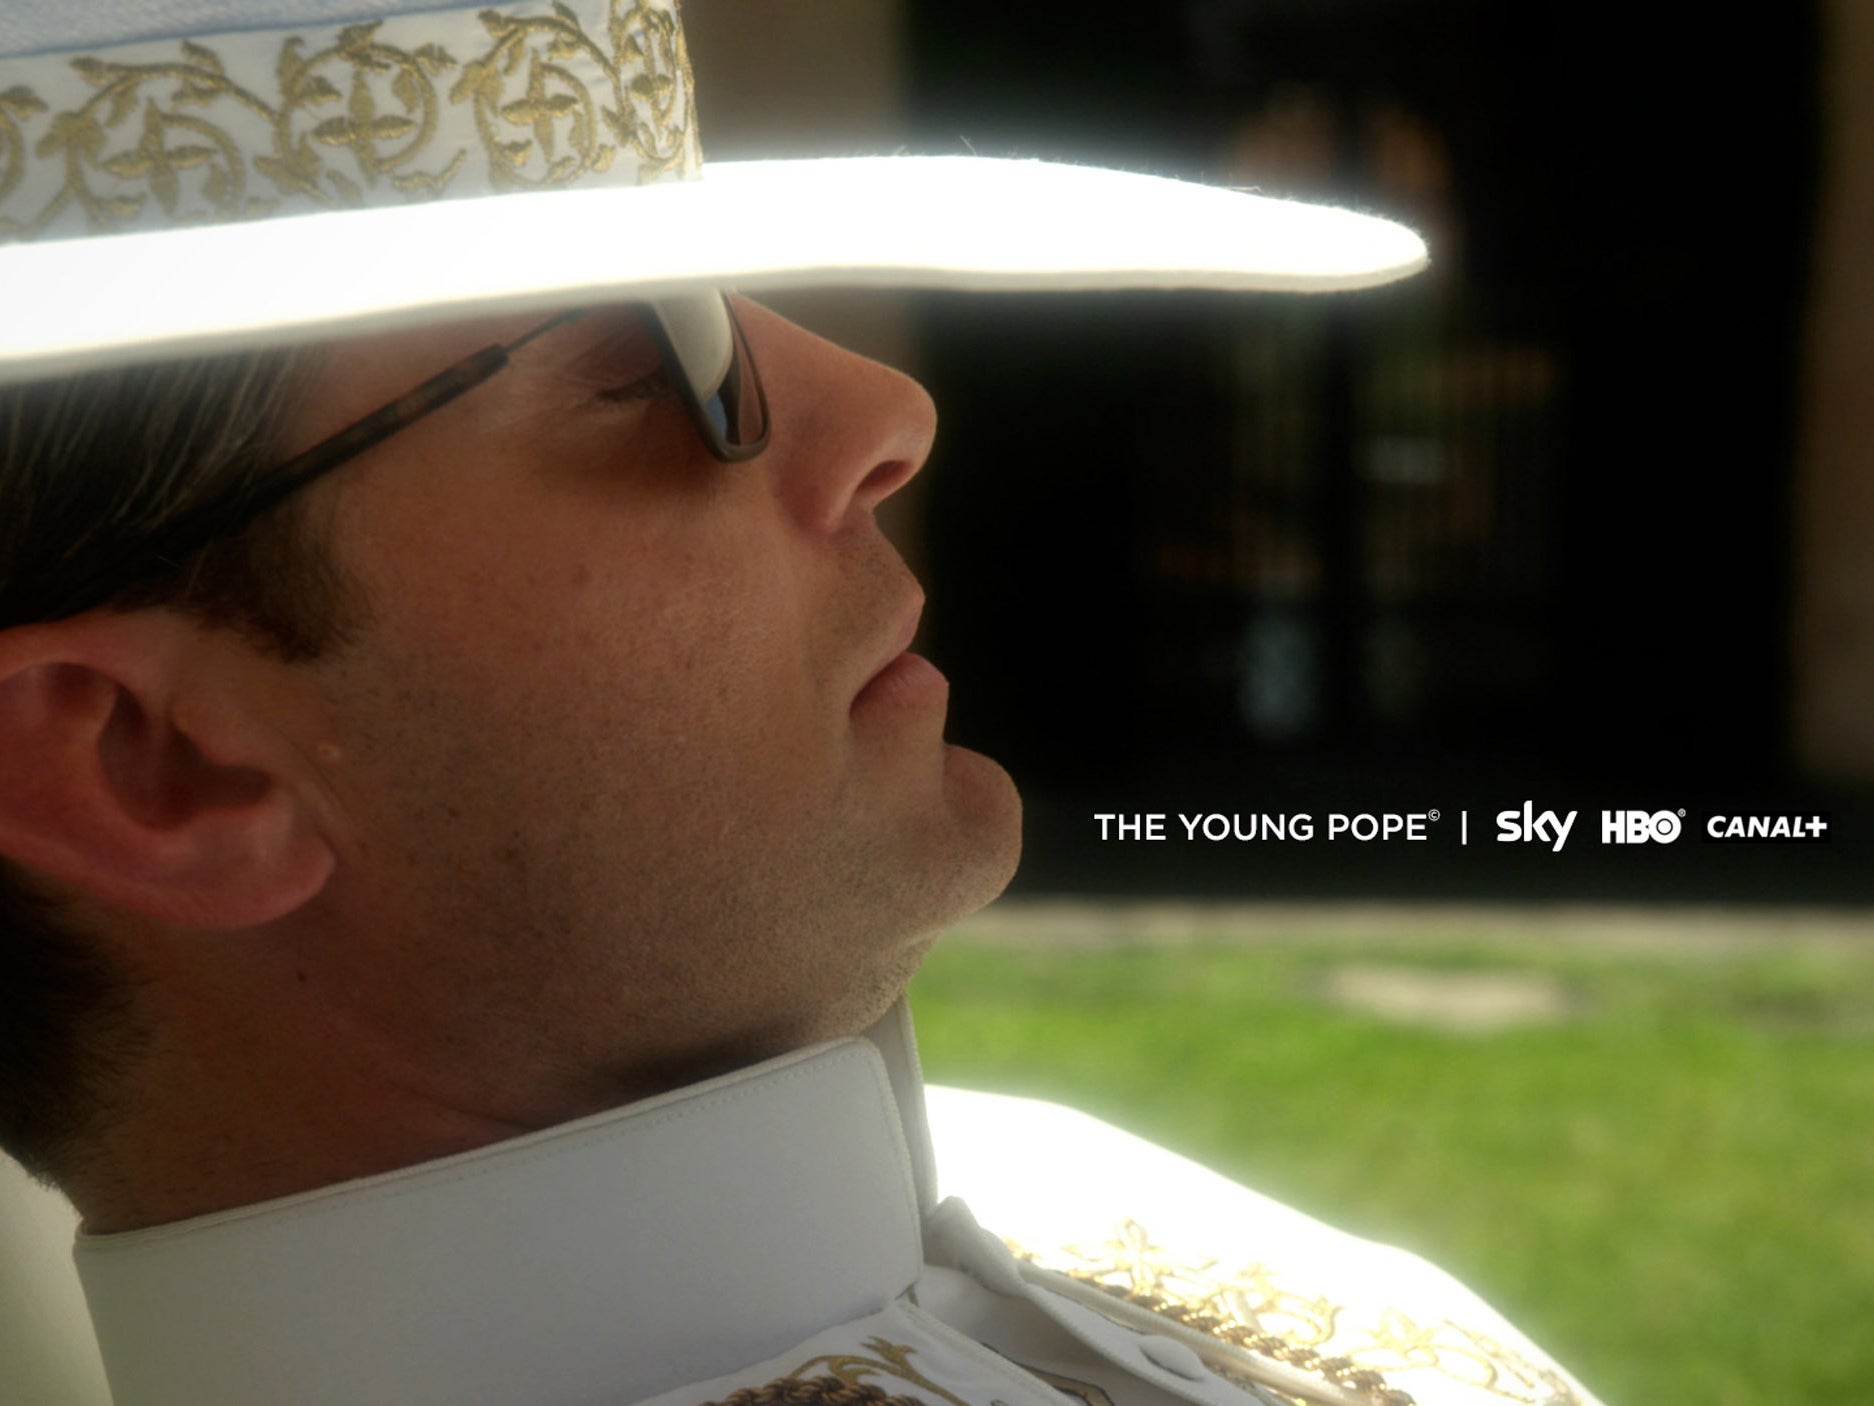 The Young Pope, featuring Jude Law portraying fictional, American-born Pope Pius XIII.